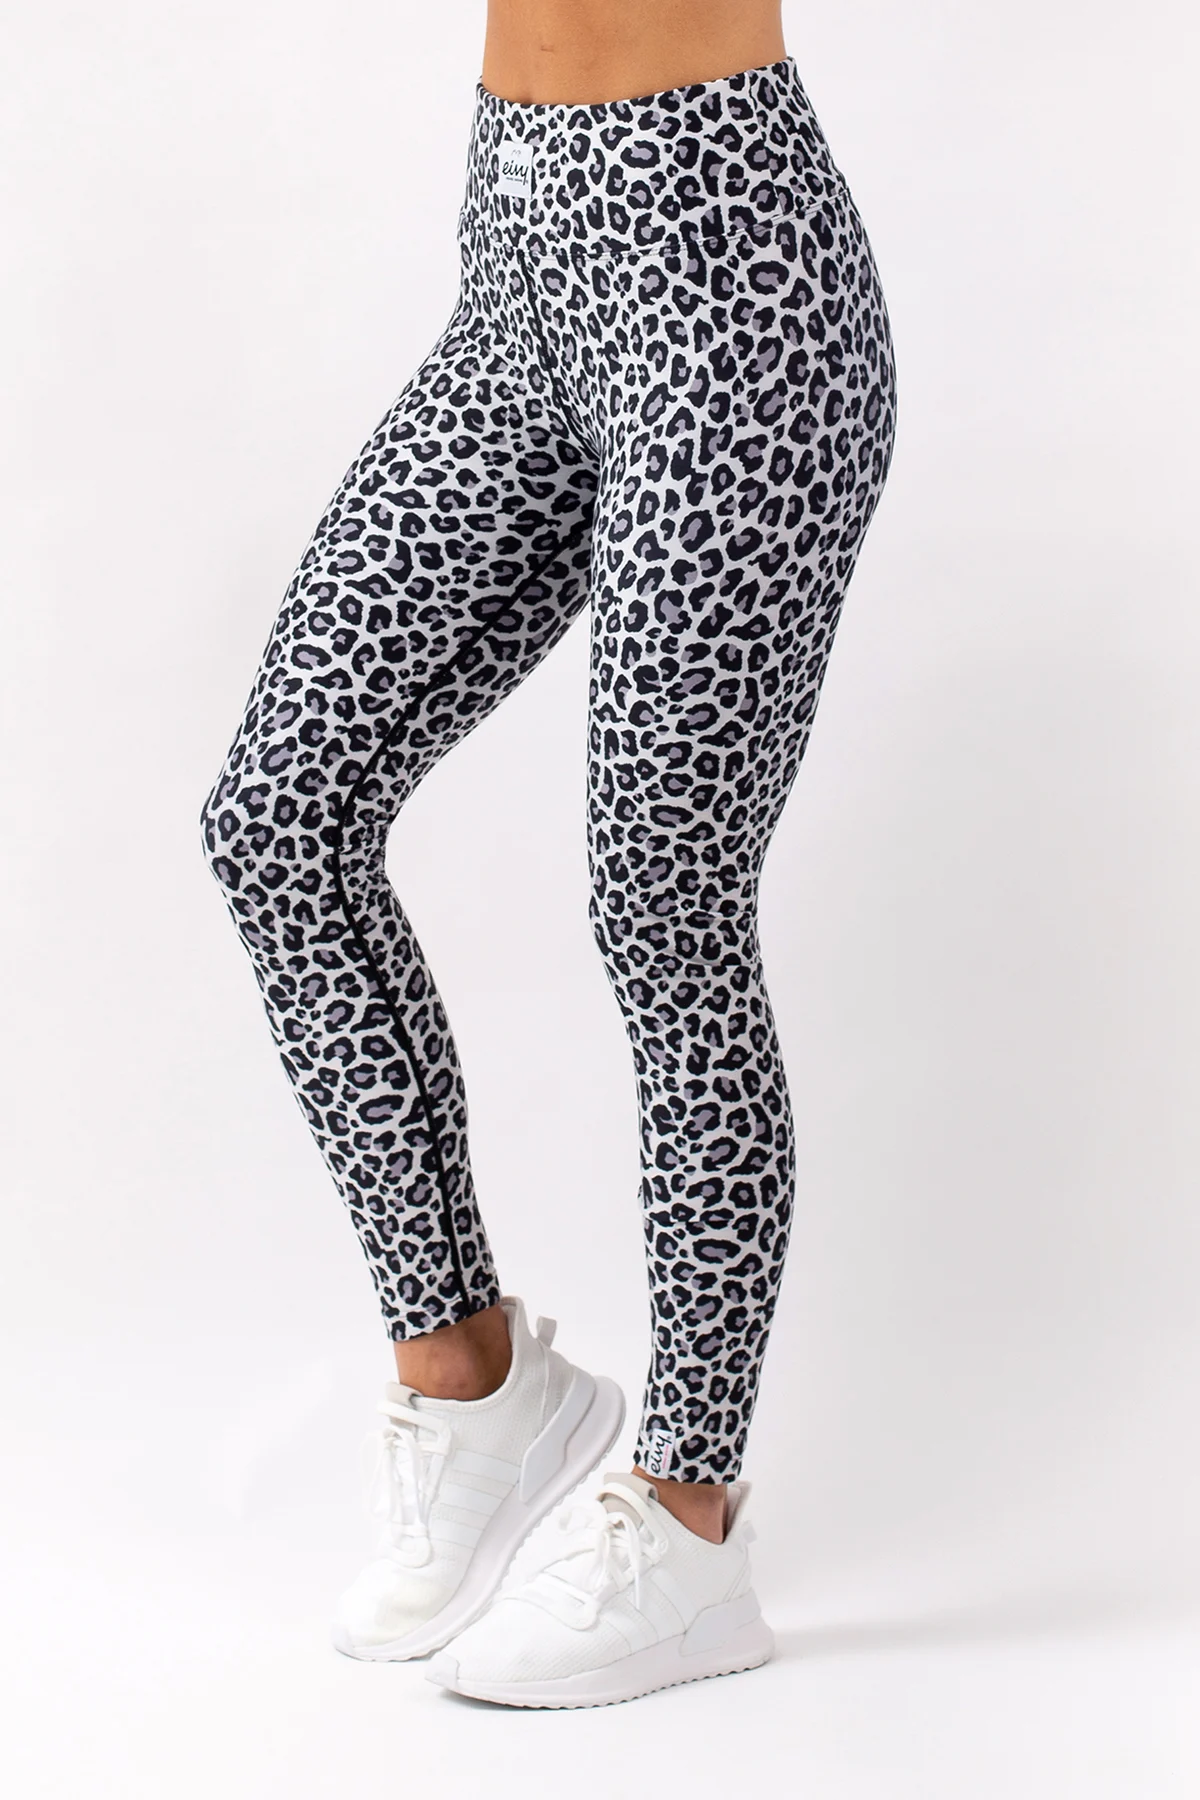 Eivy Icecold Tights snow leopard